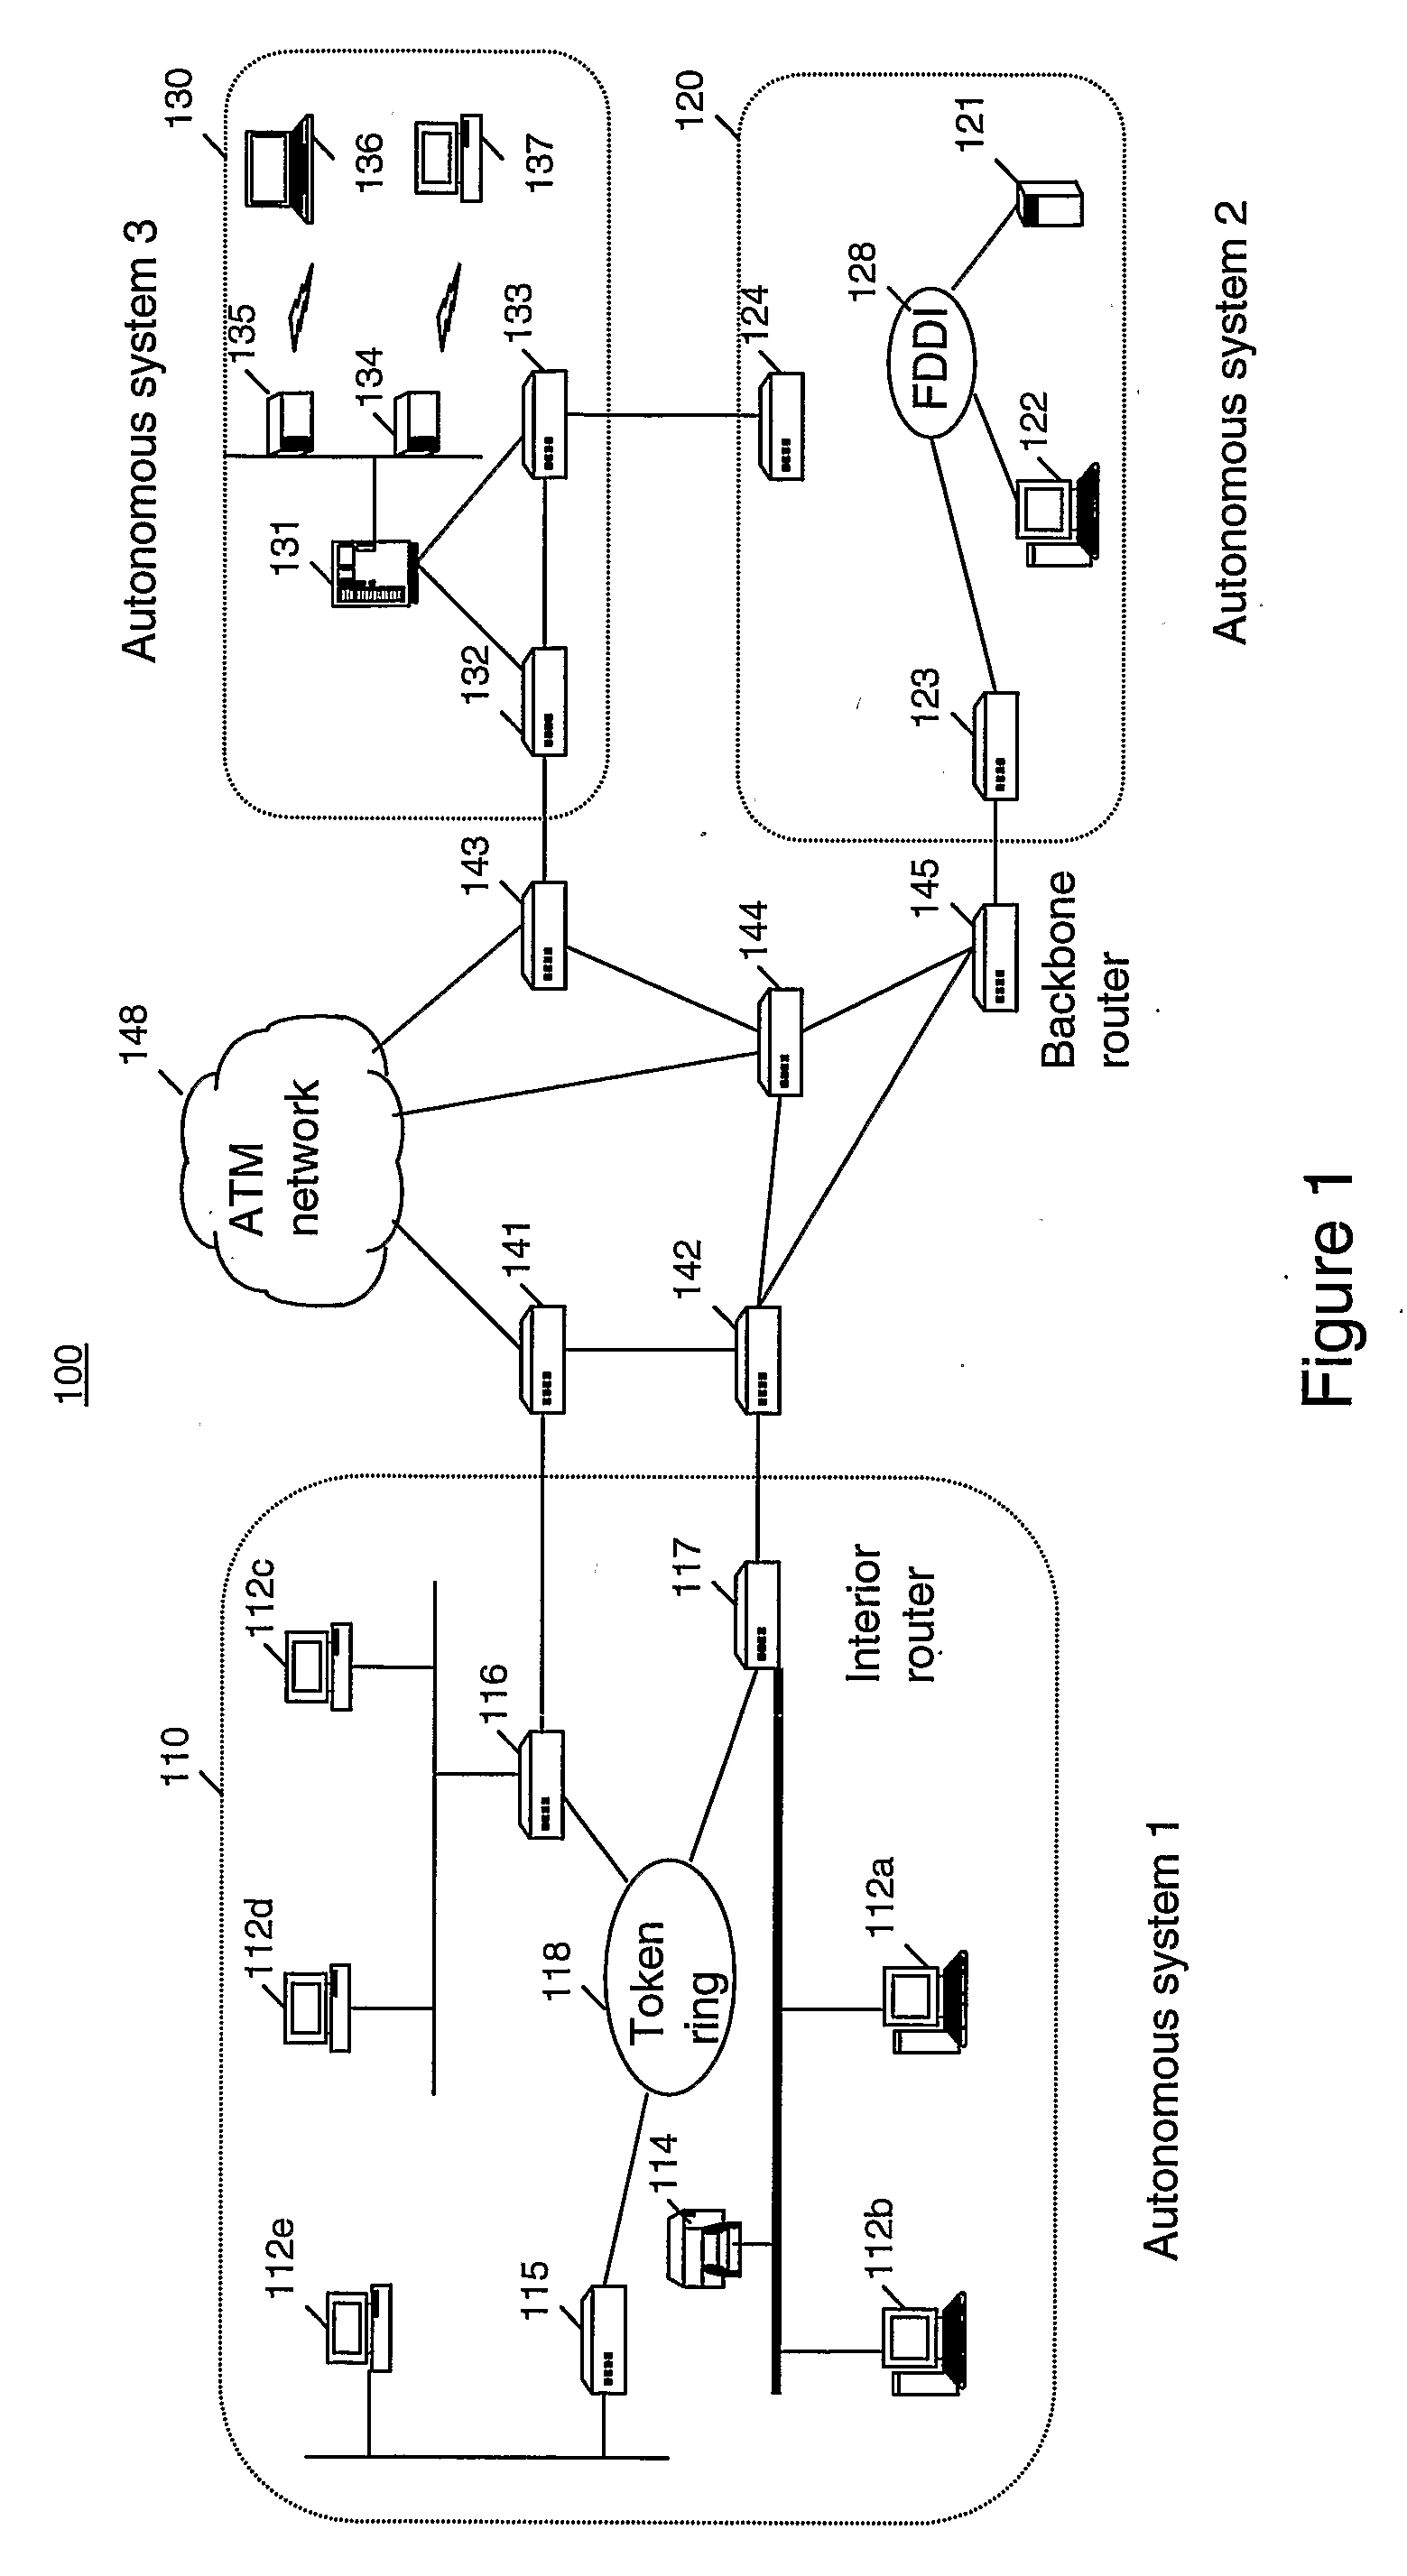 Method of Operating a System